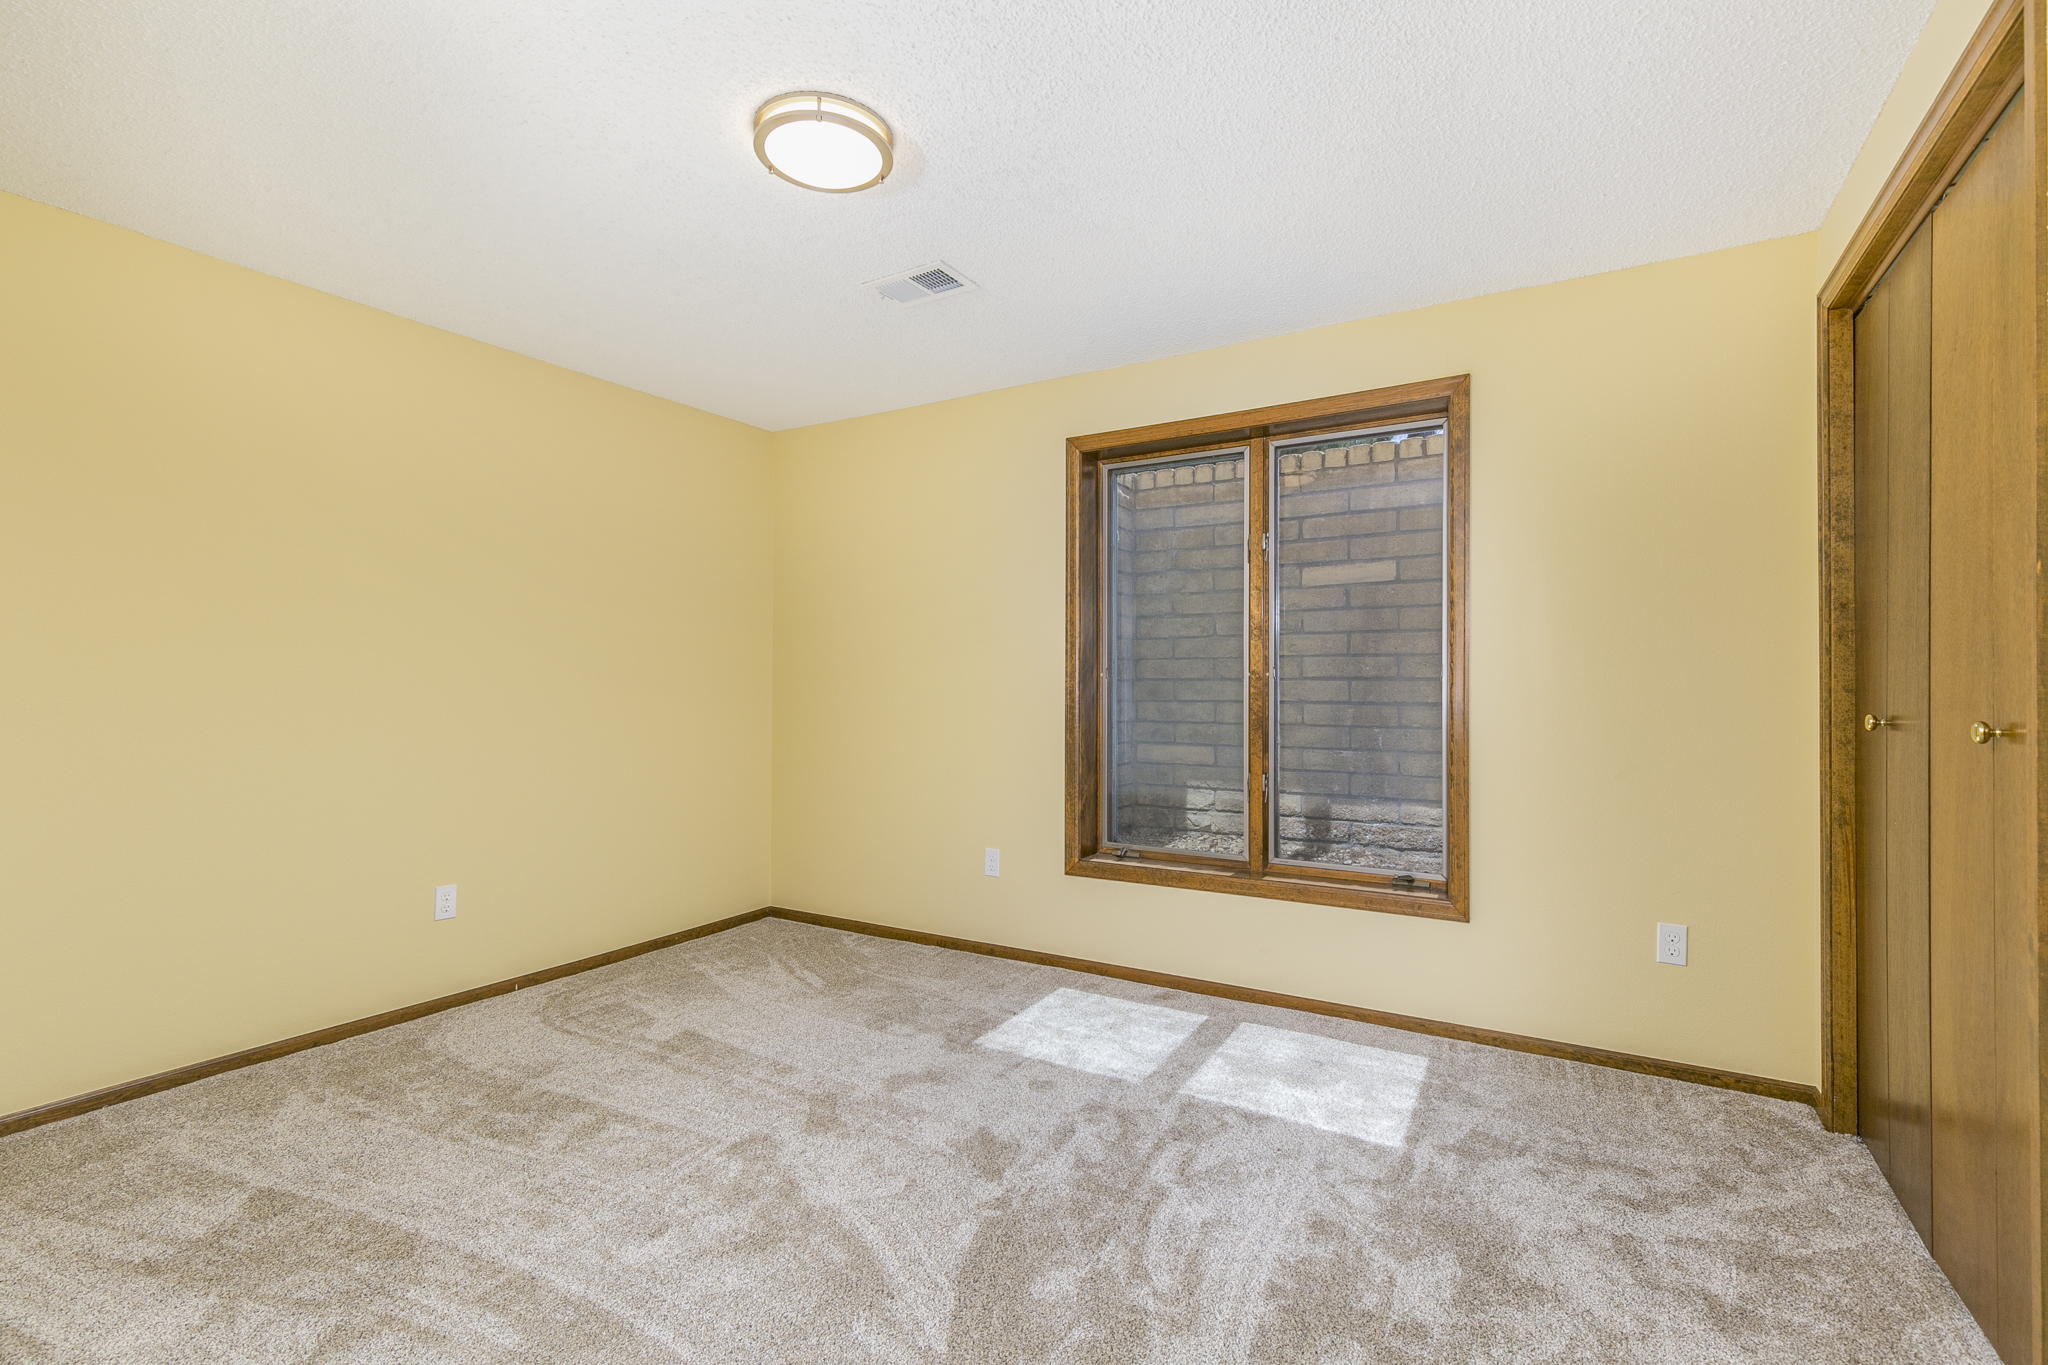 1204 Clark St, Fort Collins, CO 80524, USA Photo 29